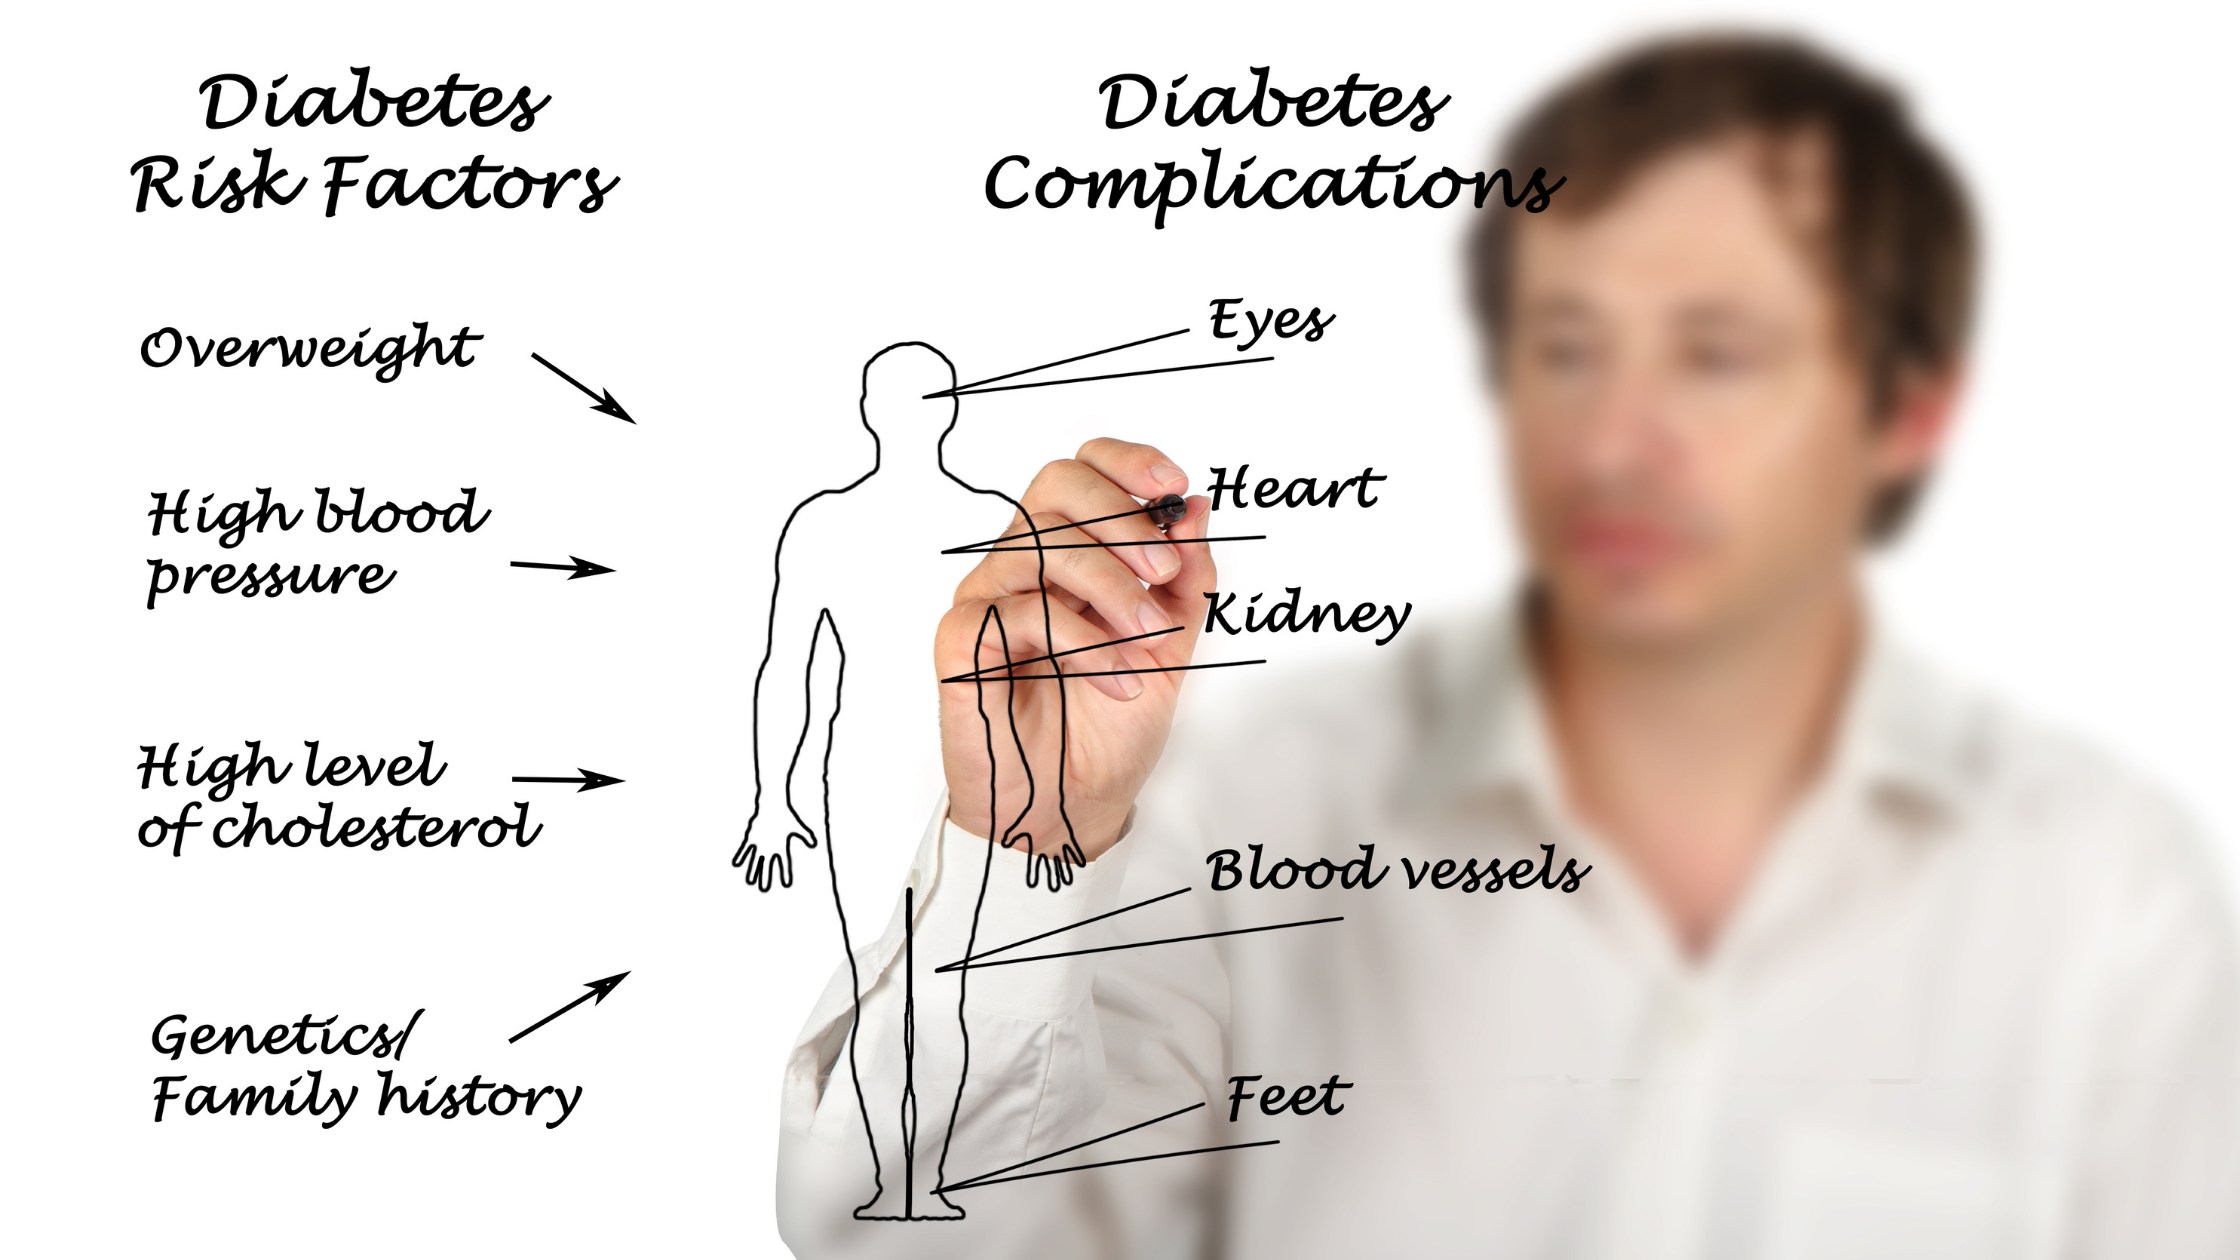 Man draws and writes out illustration describing diabetes risk factors on a clear plastic board 